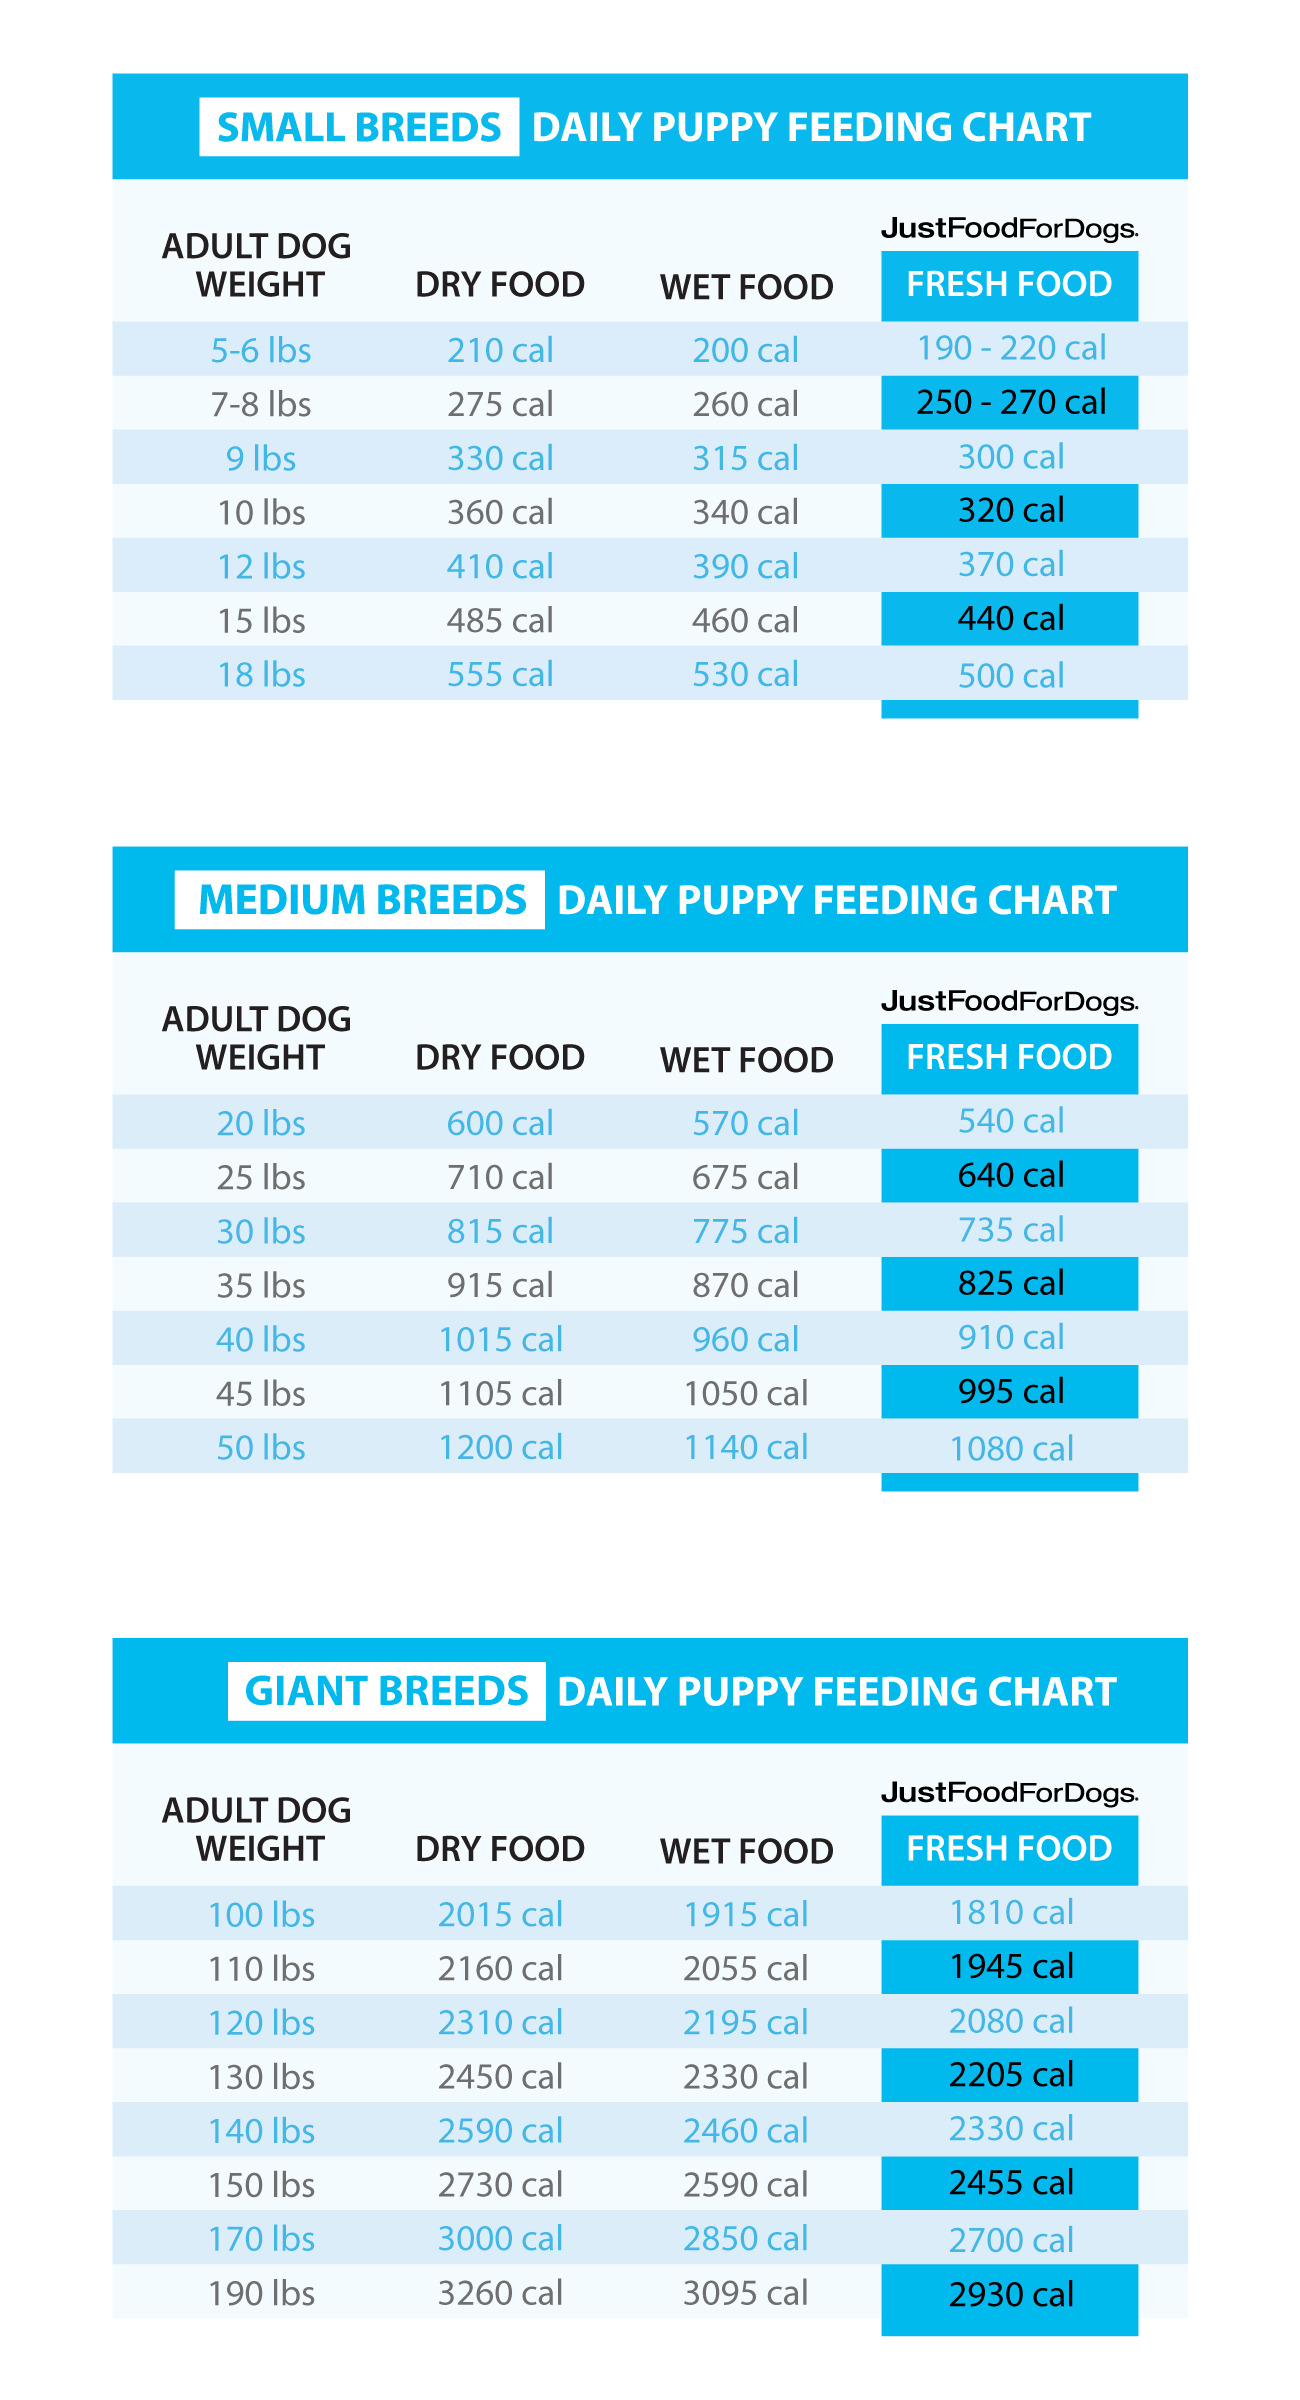 Here's When to Switch a Puppy to Adult Food